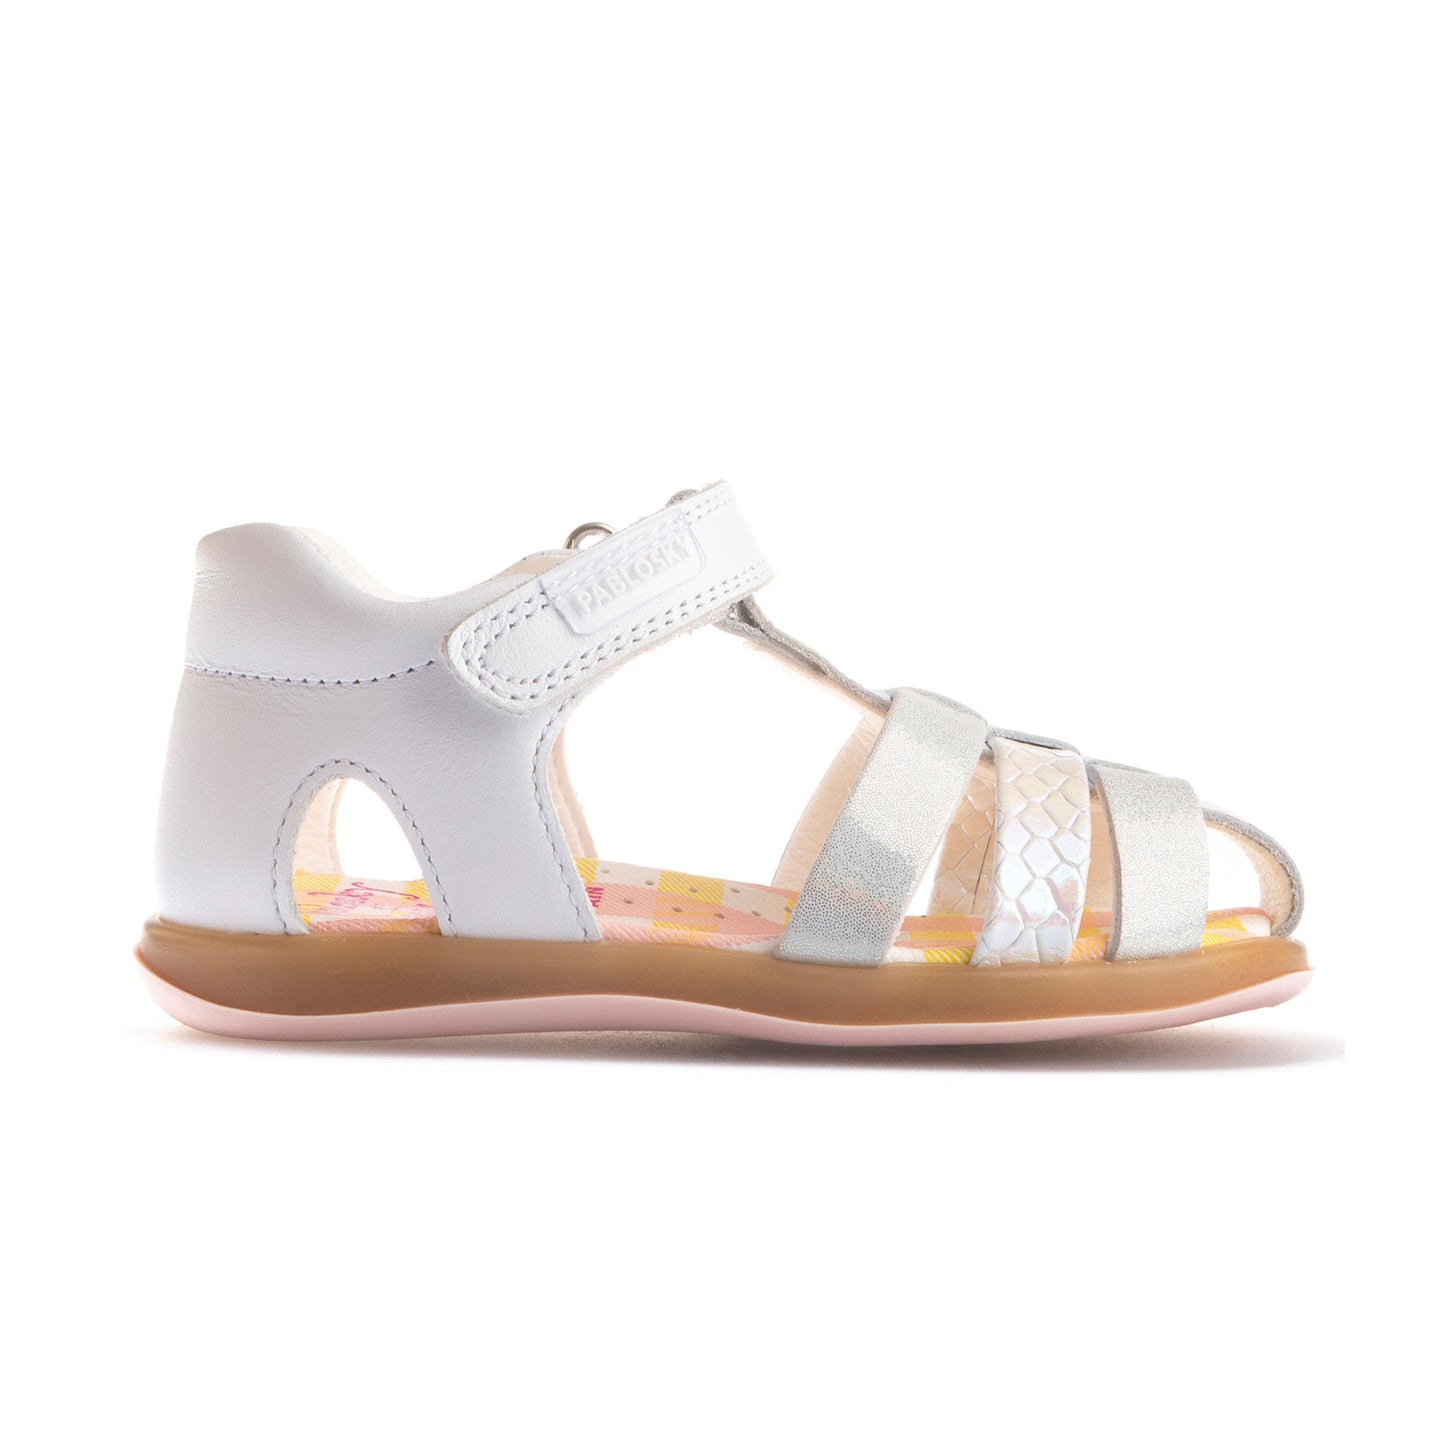 Pablosky Olimpo Sandals / 029400